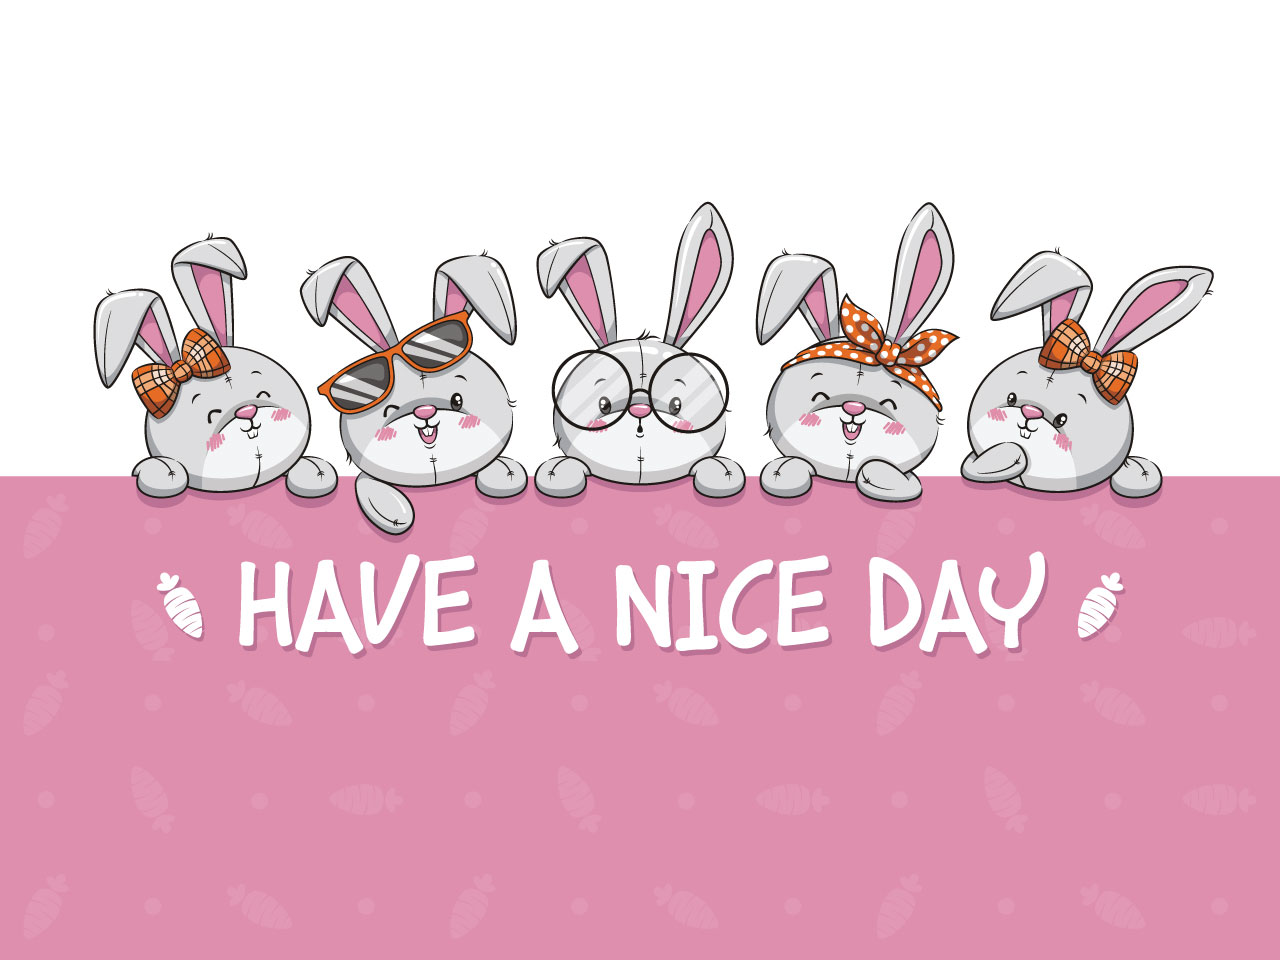 Cute adorable bunny funny rabbit heads set banner design have nice day hand drawing sketch